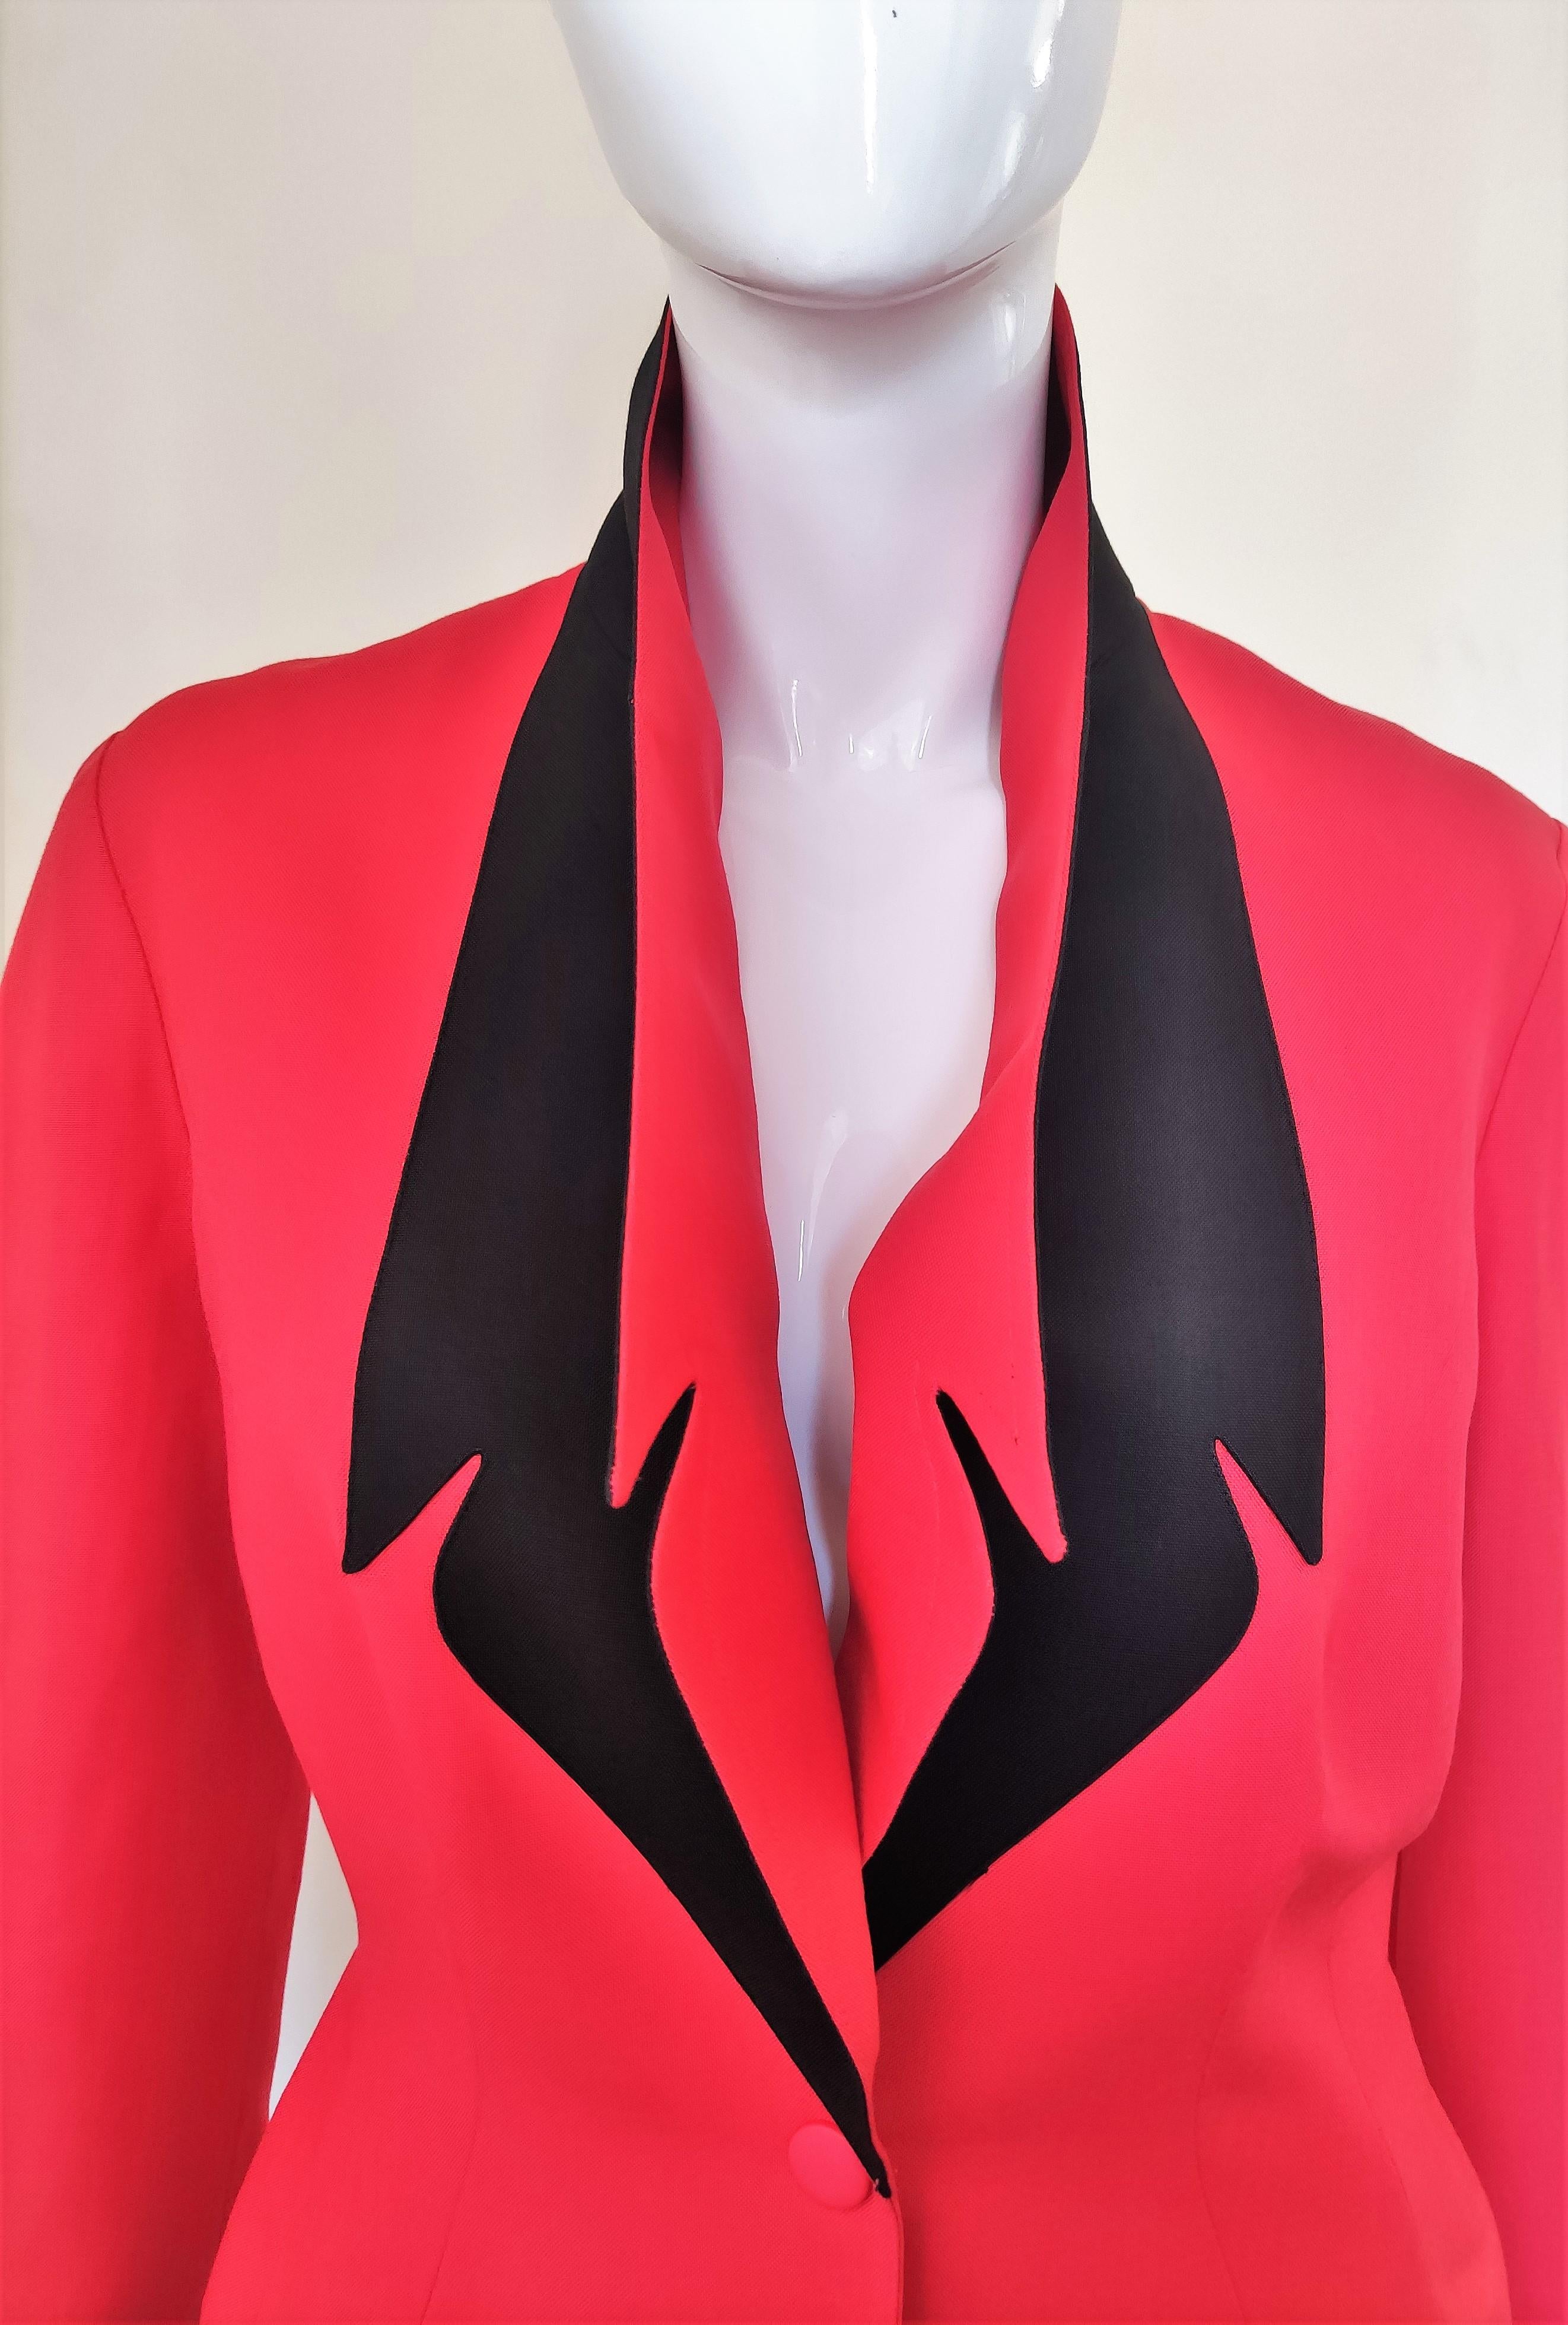 Women's Thierry Mugler Vampire Wasp Waist Red Black Rainbow Couture Dress Ensemble Suit For Sale